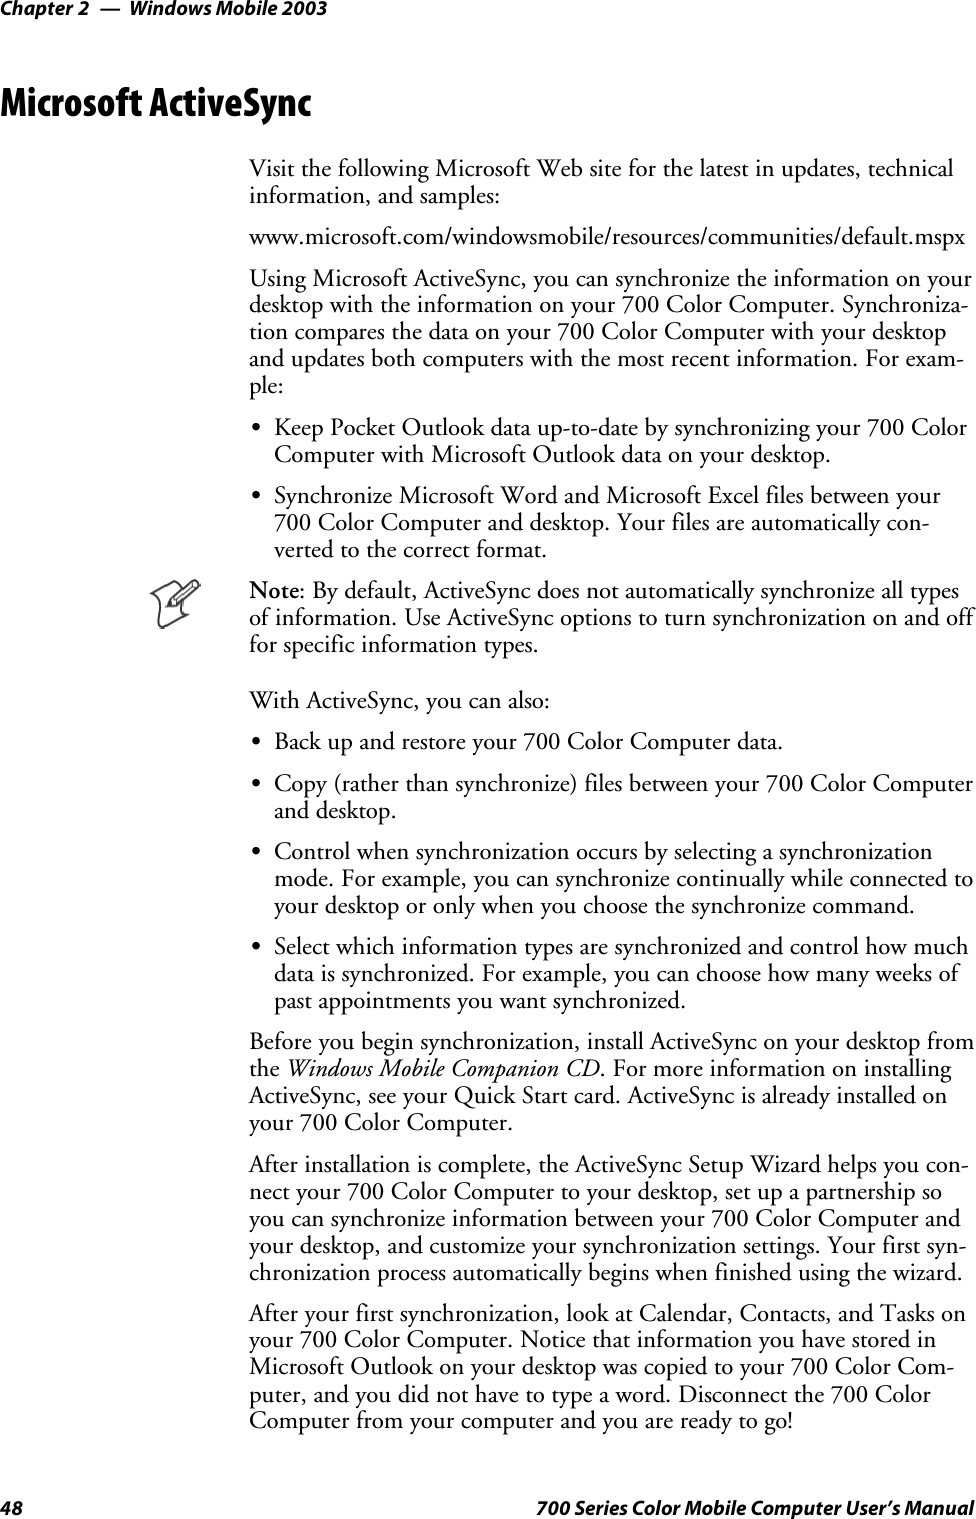 Windows Mobile 2003Chapter —248 700 Series Color Mobile Computer User’s ManualMicrosoft ActiveSyncVisit the following Microsoft Web site for the latest in updates, technicalinformation, and samples:www.microsoft.com/windowsmobile/resources/communities/default.mspxUsing Microsoft ActiveSync, you can synchronize the information on yourdesktop with the information on your 700 Color Computer. Synchroniza-tion compares the data on your 700 Color Computer with your desktopand updates both computers with the most recent information. For exam-ple:SKeep Pocket Outlook data up-to-date by synchronizing your 700 ColorComputer with Microsoft Outlook data on your desktop.SSynchronize Microsoft Word and Microsoft Excel files between your700 Color Computer and desktop. Your files are automatically con-verted to the correct format.Note: By default, ActiveSync does not automatically synchronize all typesof information. Use ActiveSync options to turn synchronization on and offfor specific information types.With ActiveSync, you can also:SBack up and restore your 700 Color Computer data.SCopy (rather than synchronize) files between your 700 Color Computerand desktop.SControl when synchronization occurs by selecting a synchronizationmode. For example, you can synchronize continually while connected toyour desktop or only when you choose the synchronize command.SSelect which information types are synchronized and control how muchdata is synchronized. For example, you can choose how many weeks ofpast appointments you want synchronized.Before you begin synchronization, install ActiveSync on your desktop fromthe Windows Mobile Companion CD. For more information on installingActiveSync, see your Quick Start card. ActiveSync is already installed onyour 700 Color Computer.After installation is complete, the ActiveSync Setup Wizard helps you con-nectyour700ColorComputertoyourdesktop,setupapartnershipsoyou can synchronize information between your 700 Color Computer andyour desktop, and customize your synchronization settings. Your first syn-chronization process automatically begins when finished using the wizard.After your first synchronization, look at Calendar, Contacts, and Tasks onyour 700 Color Computer. Notice that information you have stored inMicrosoft Outlook on your desktop was copied to your 700 Color Com-puter, and you did not have to type a word. Disconnect the 700 ColorComputer from your computer and you are ready to go!